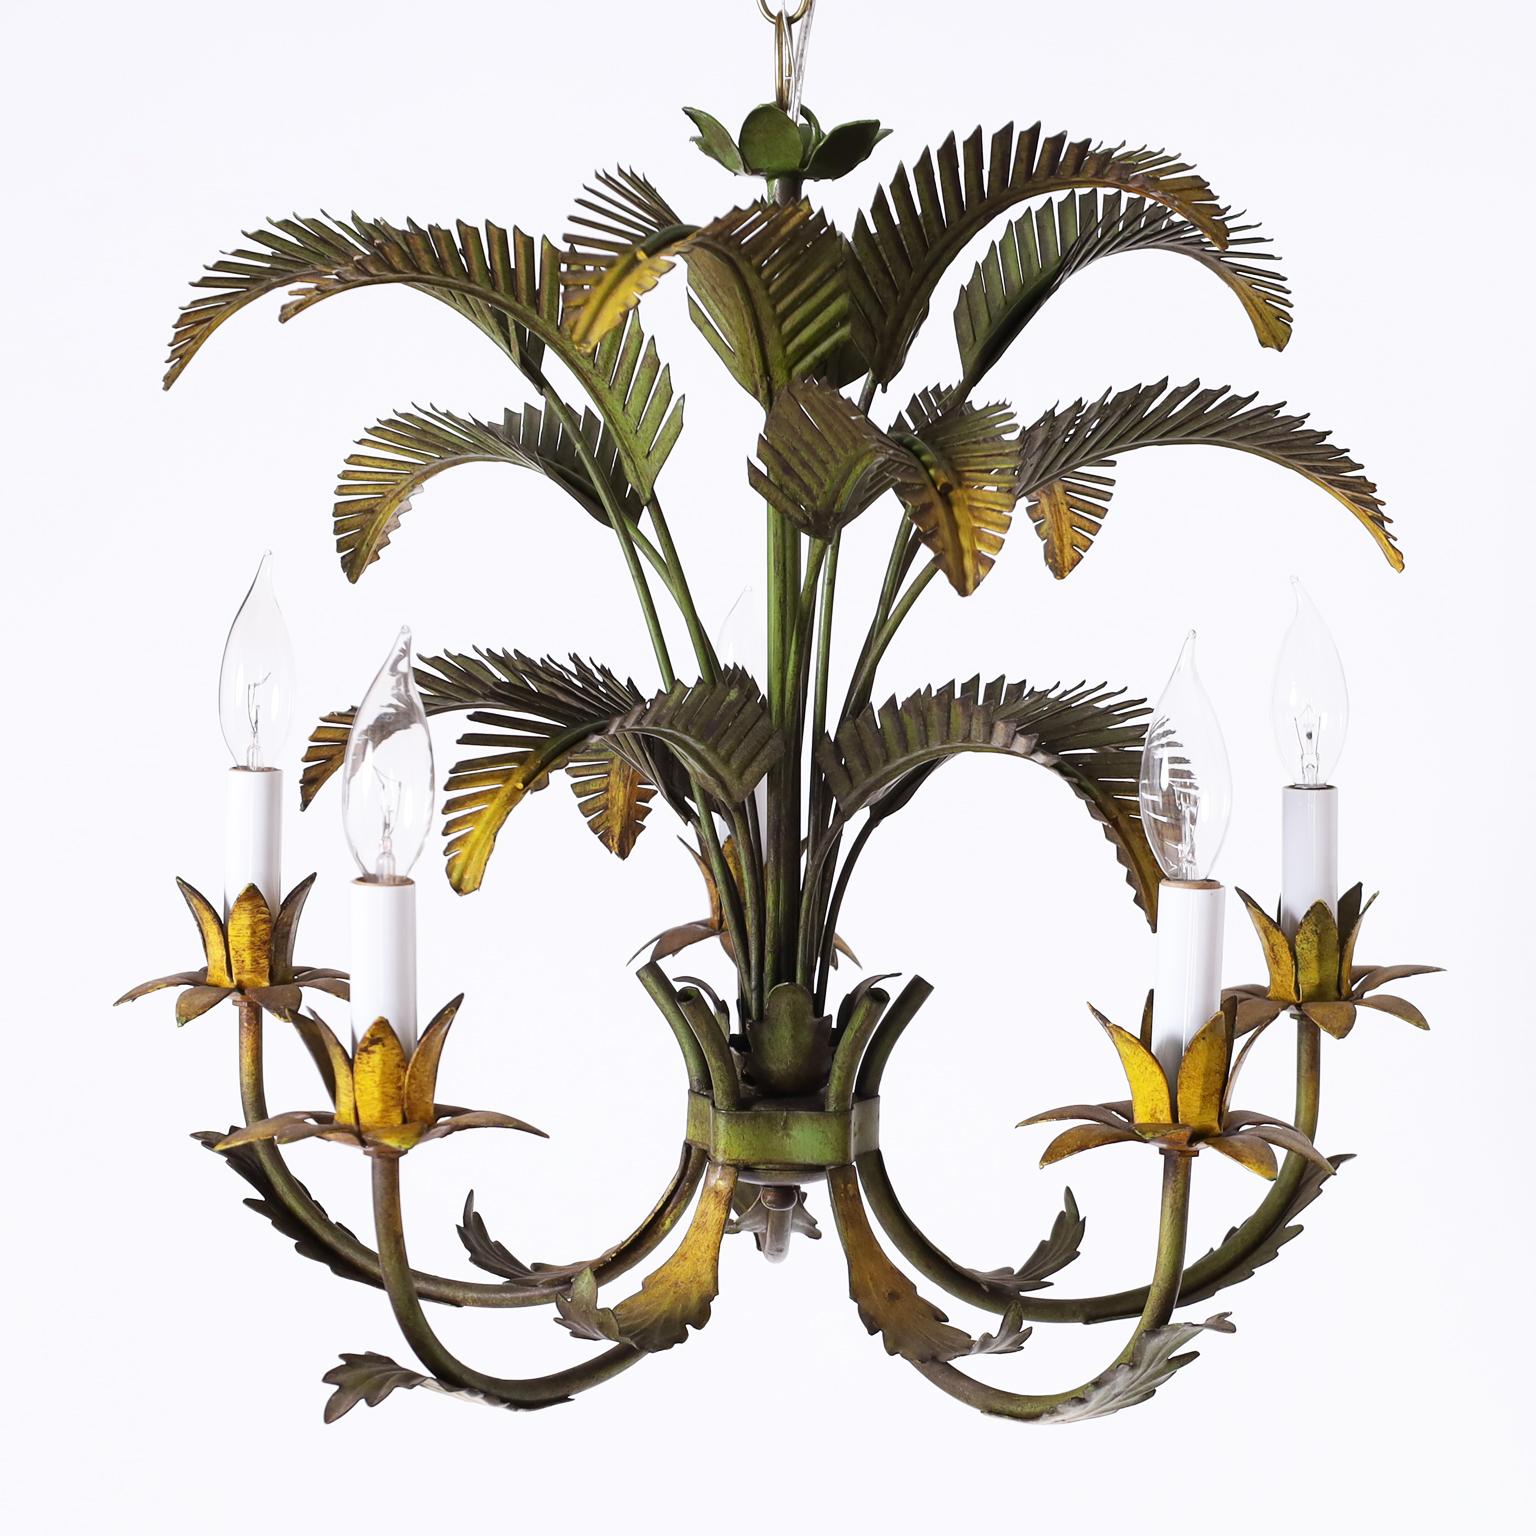 Italian tole five light chandelier with palm leaves over graceful arms with acanthus leaves and floral candle cups all having a rustic aged yellow and green finish.